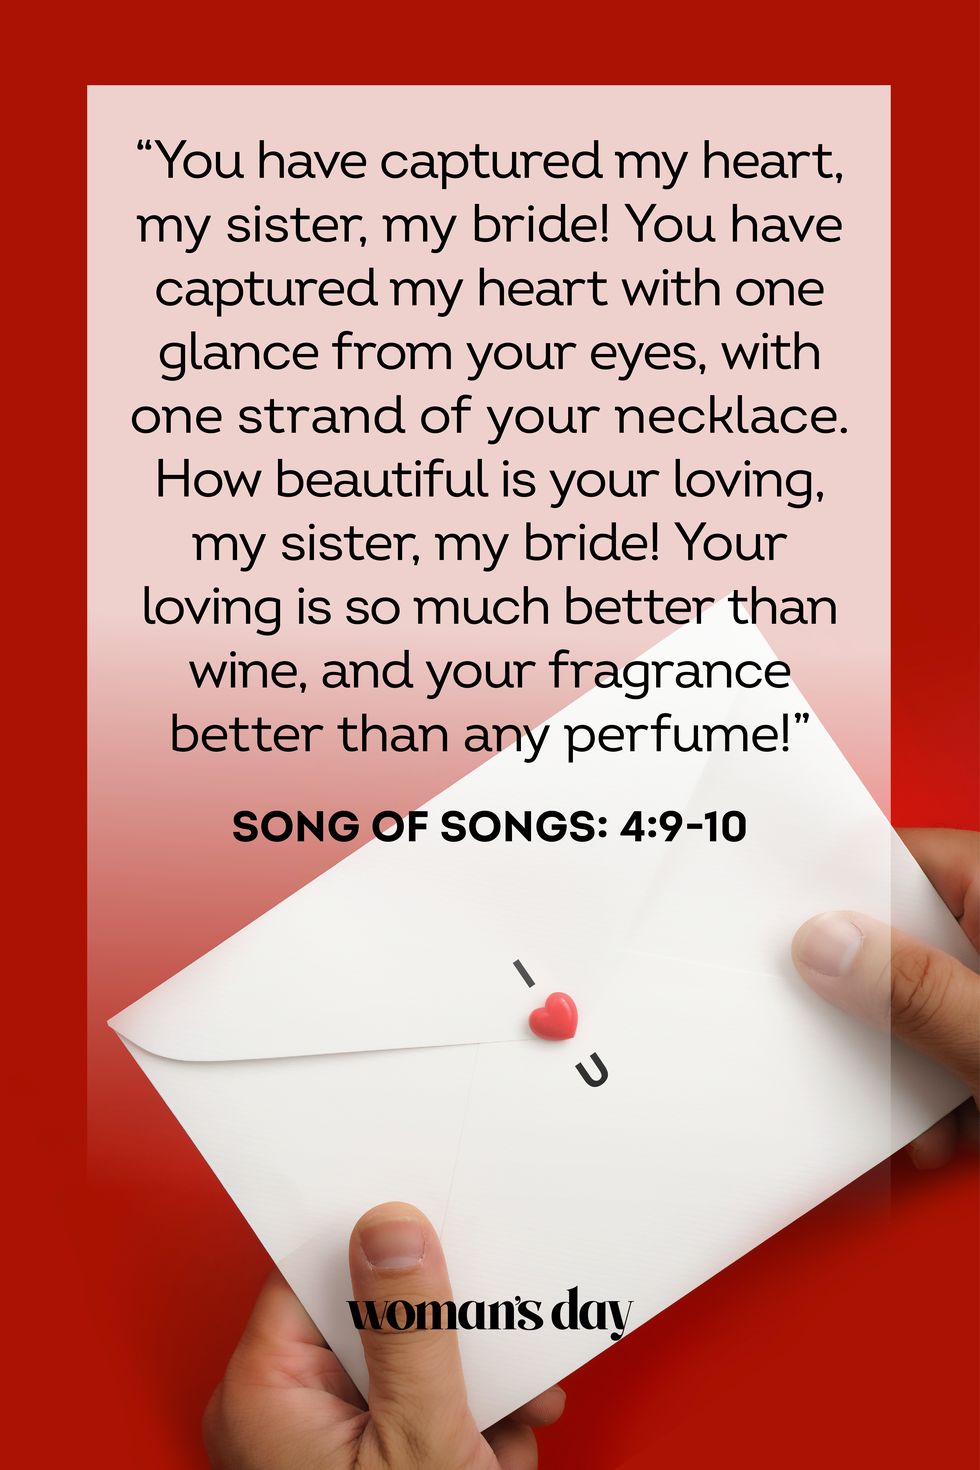 bible verses about marriage song of songs 4 9 10